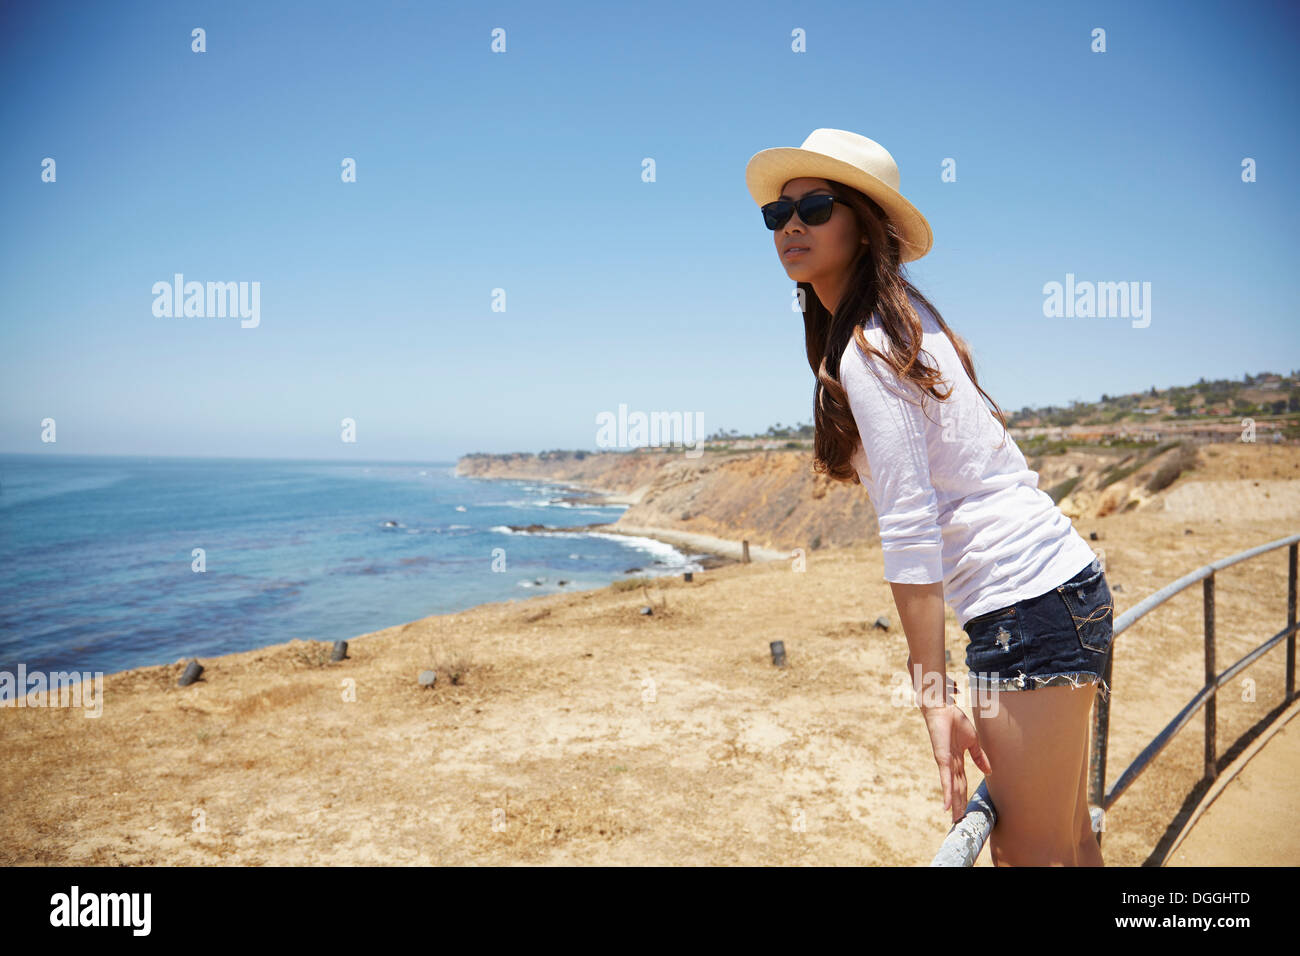 Young woman standing on fence, Palos Verdes, California, USA Banque D'Images